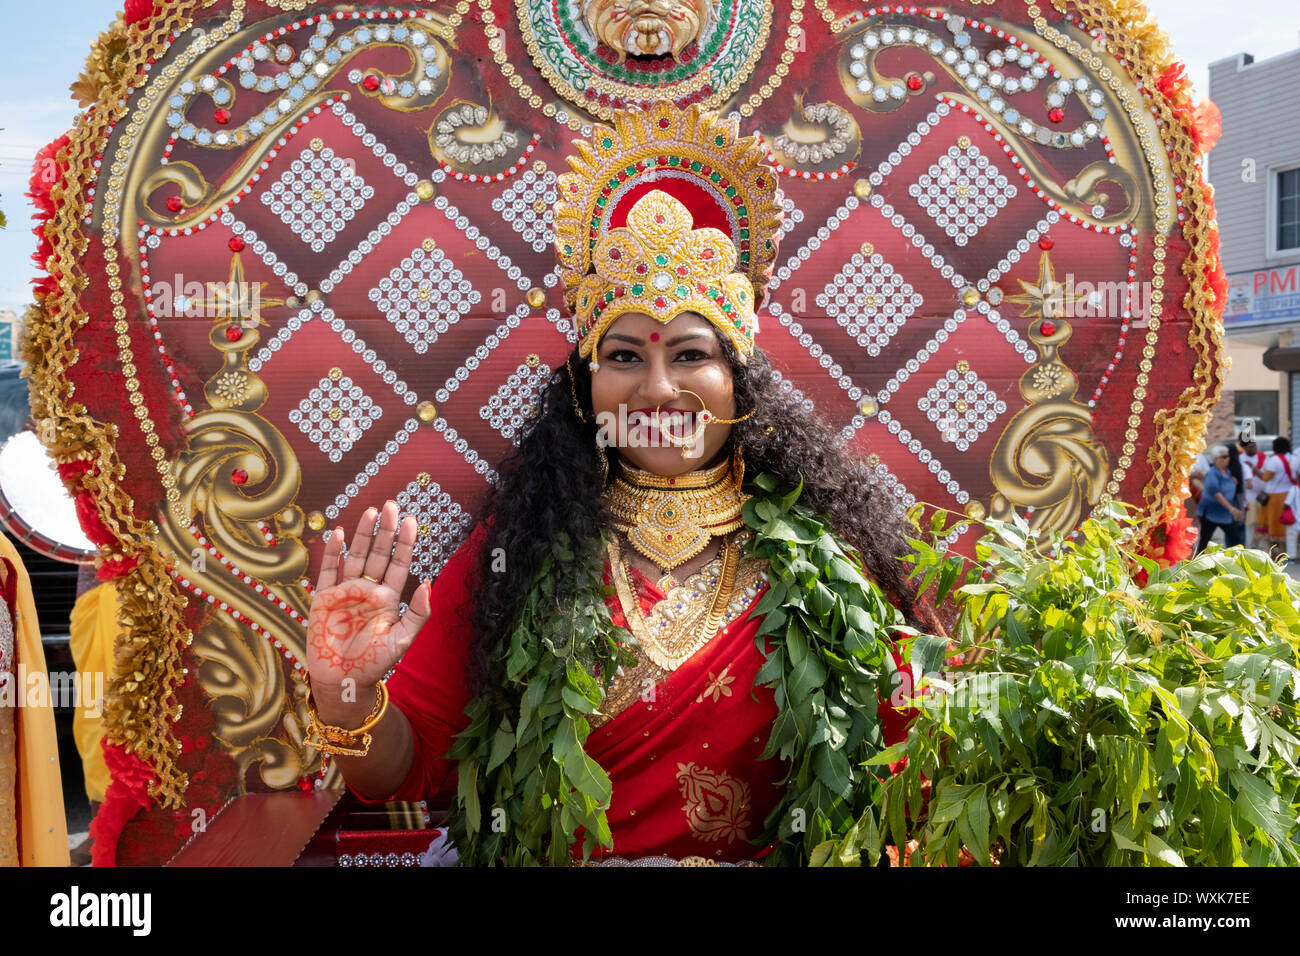 A beautiful Hindu woman with long curly hait dressed as the Goddess Mariamma the Madrassi Parade for unity in the community in Richmond Hill, Queens. Stock Photo